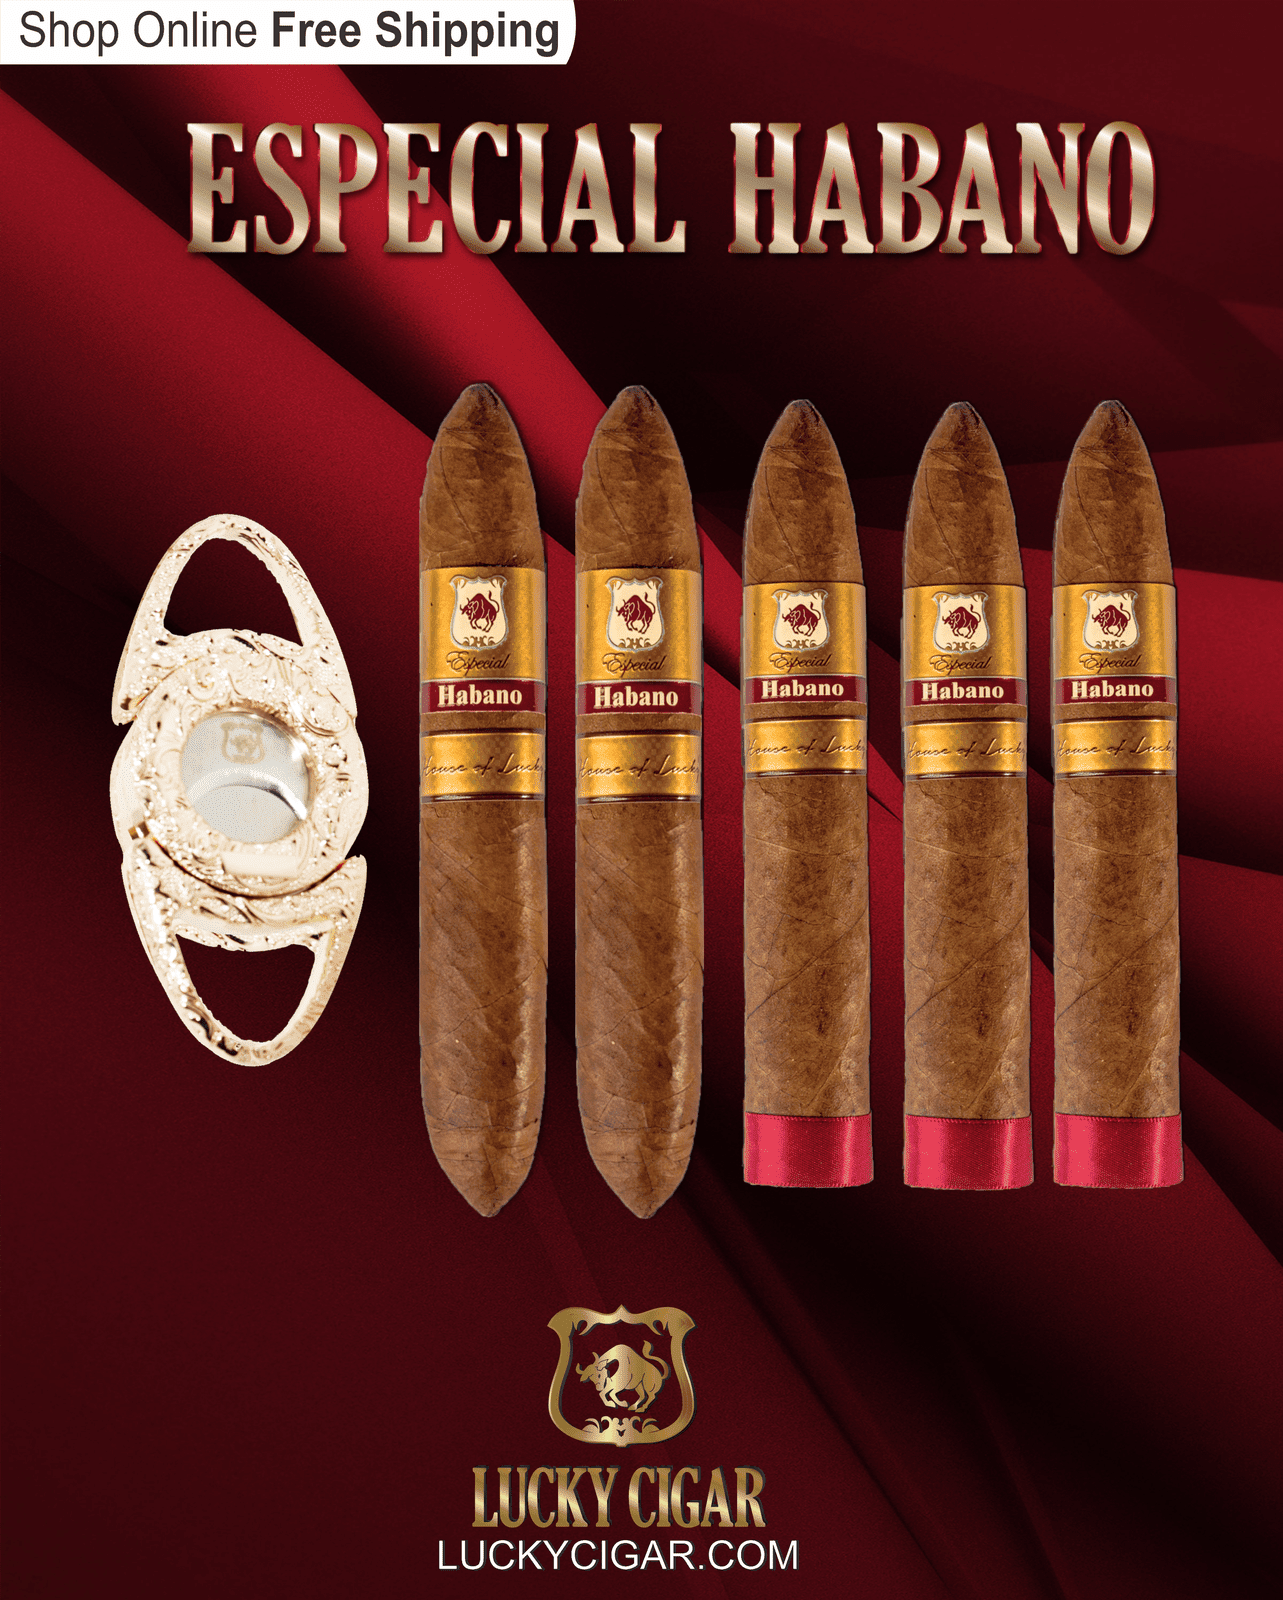 Habano Cigars: Especial Habano by Lucky Cigar: Set of 5 Cigars 2 Perfecto, 2 Torpedo with Cutter